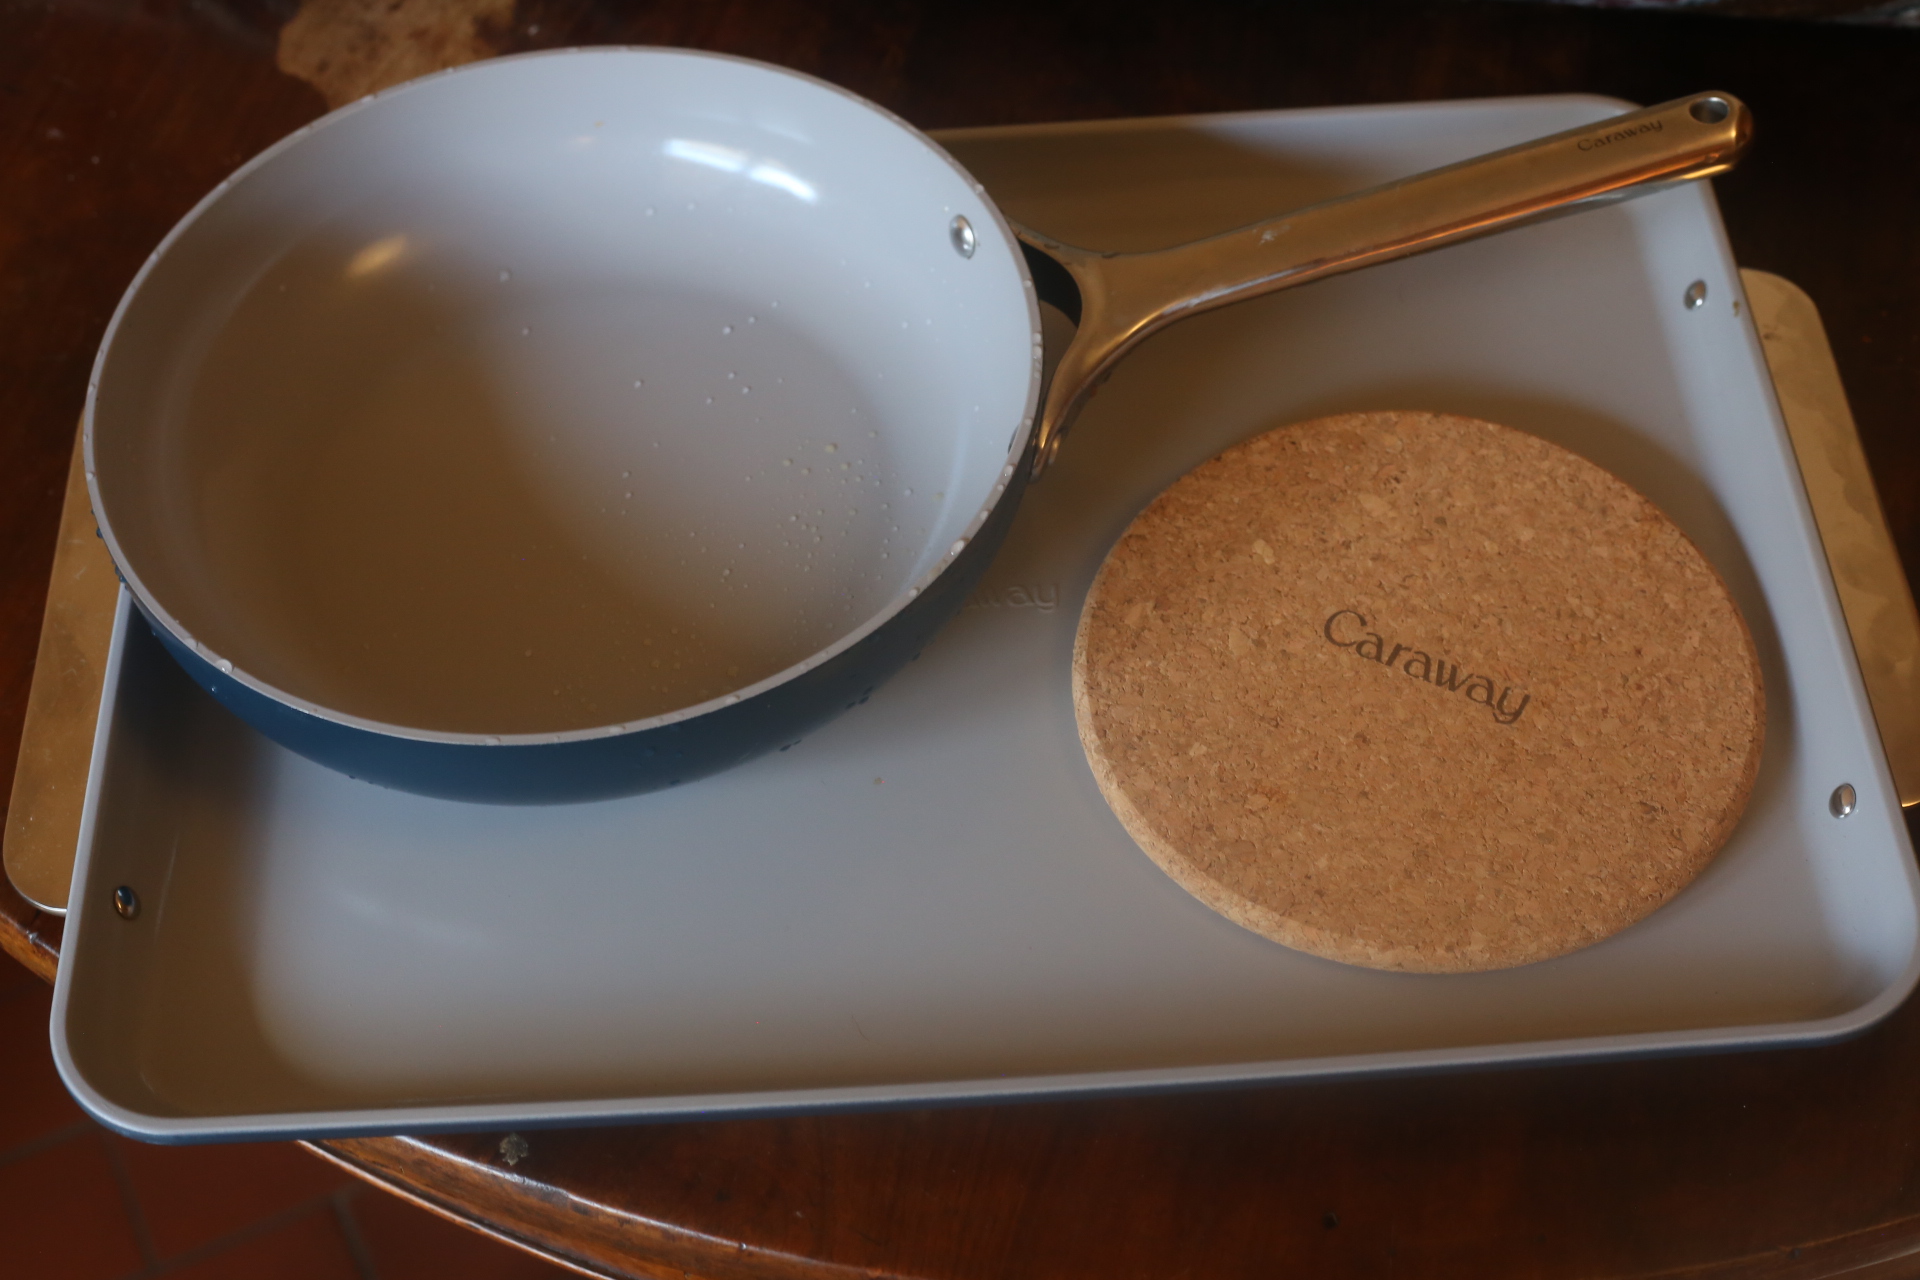 Caraway Bakeware Reviewed: Is it Worth It? Chef Tested - Organic